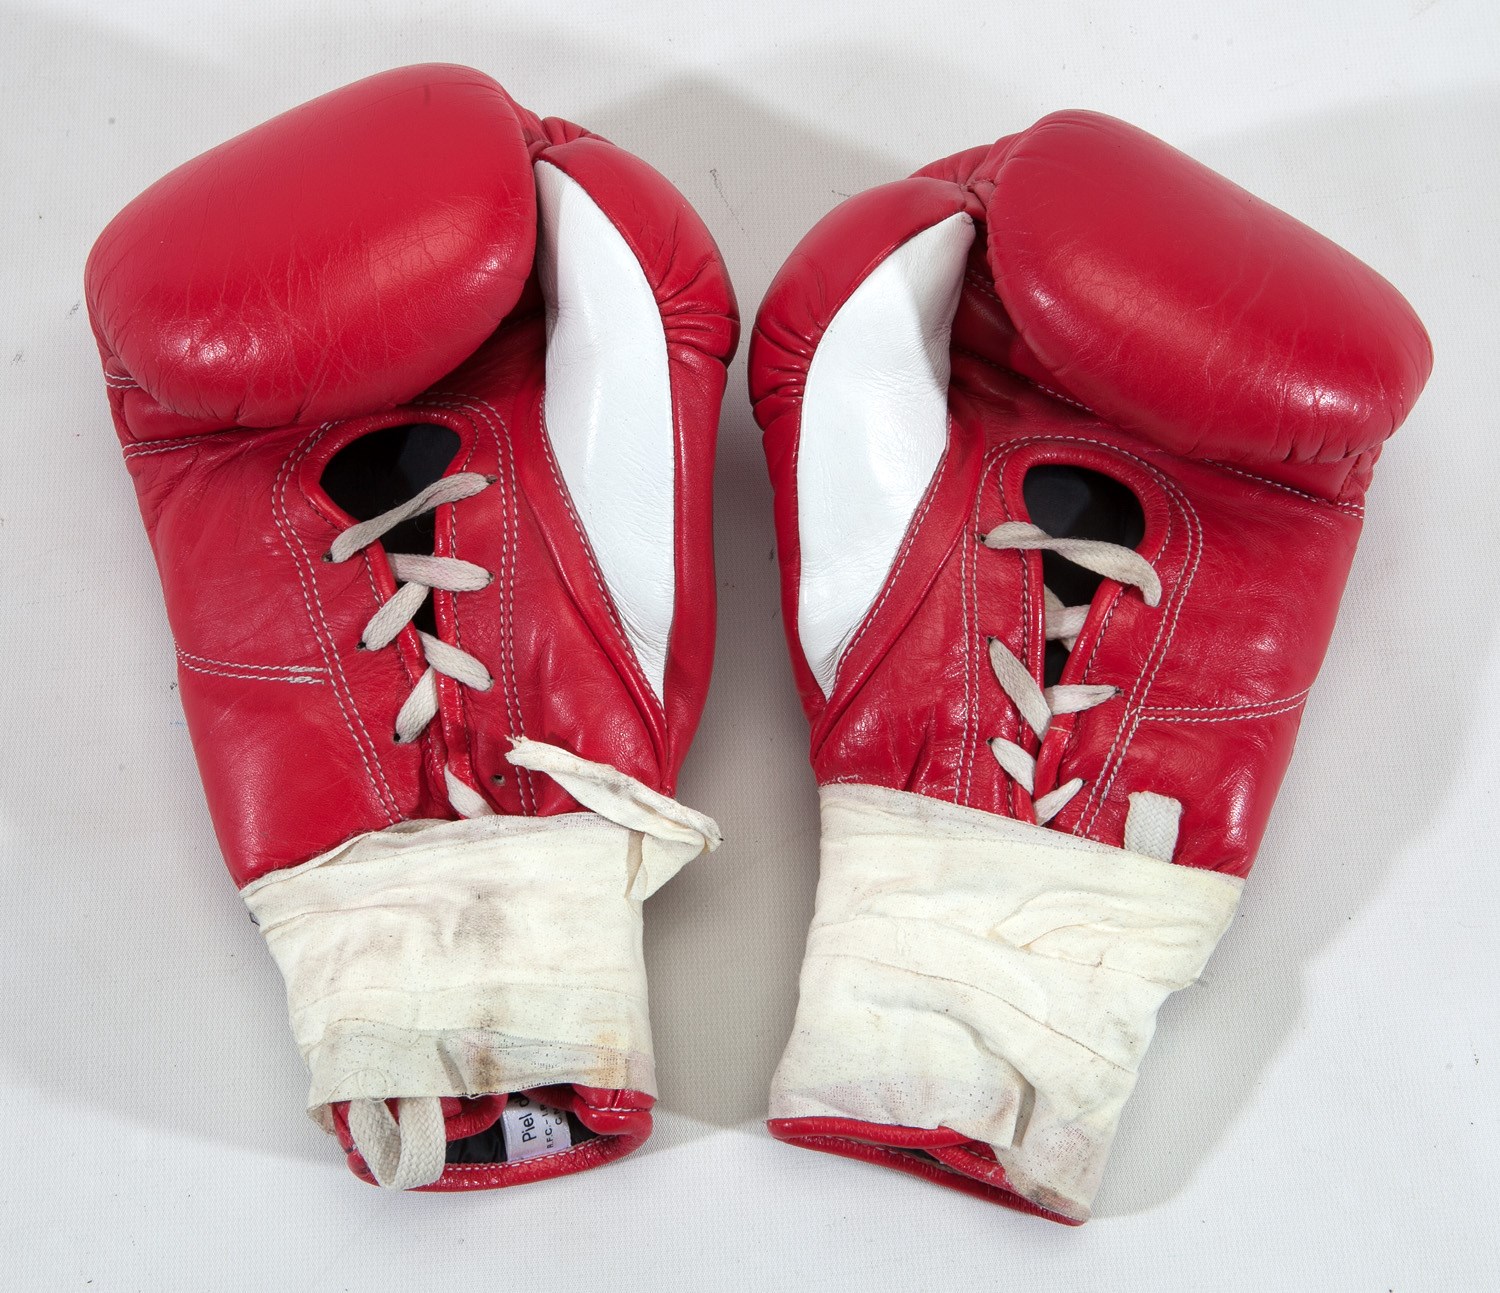 1996 Floyd Mayweather Jr. Fight Worn Boxing Gloves Used During